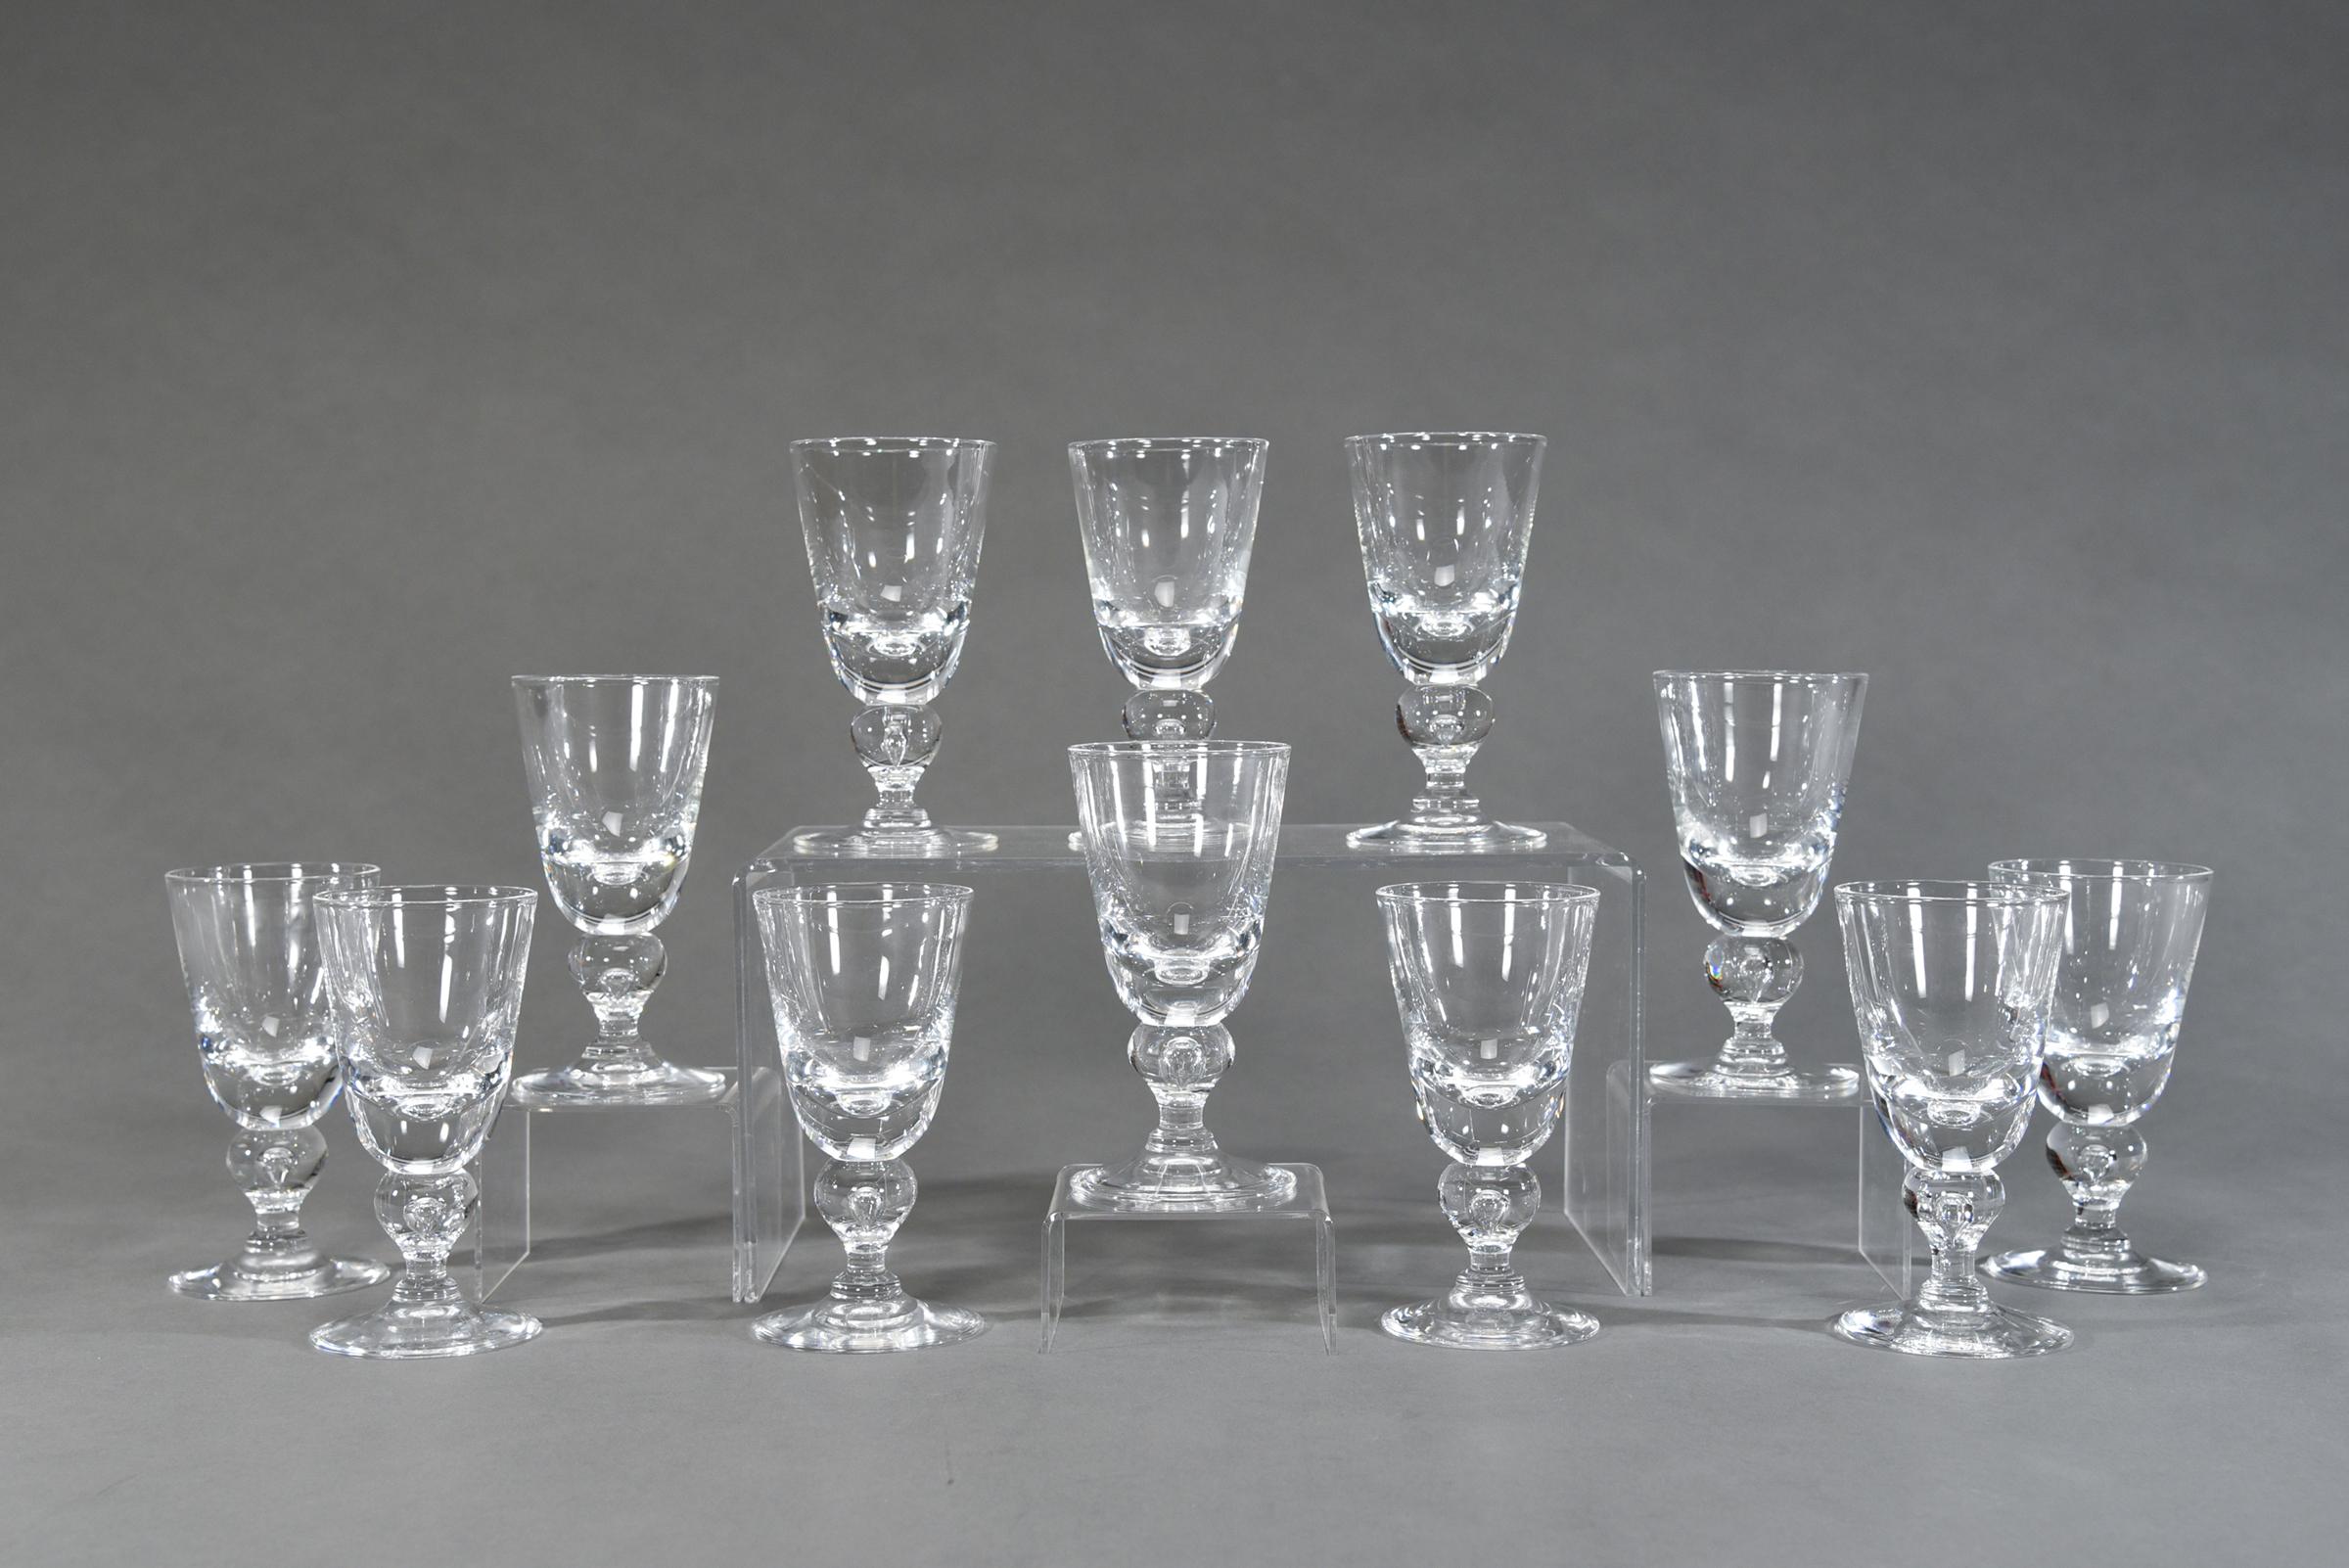 One of the most desirable patterns of Steuben's clear stemware services is this Classic baluster shaped goblet, pattern # 7877, designed by George Thompson. Hand blown crystal with a low center of gravity, it is the perfect weight, which feels